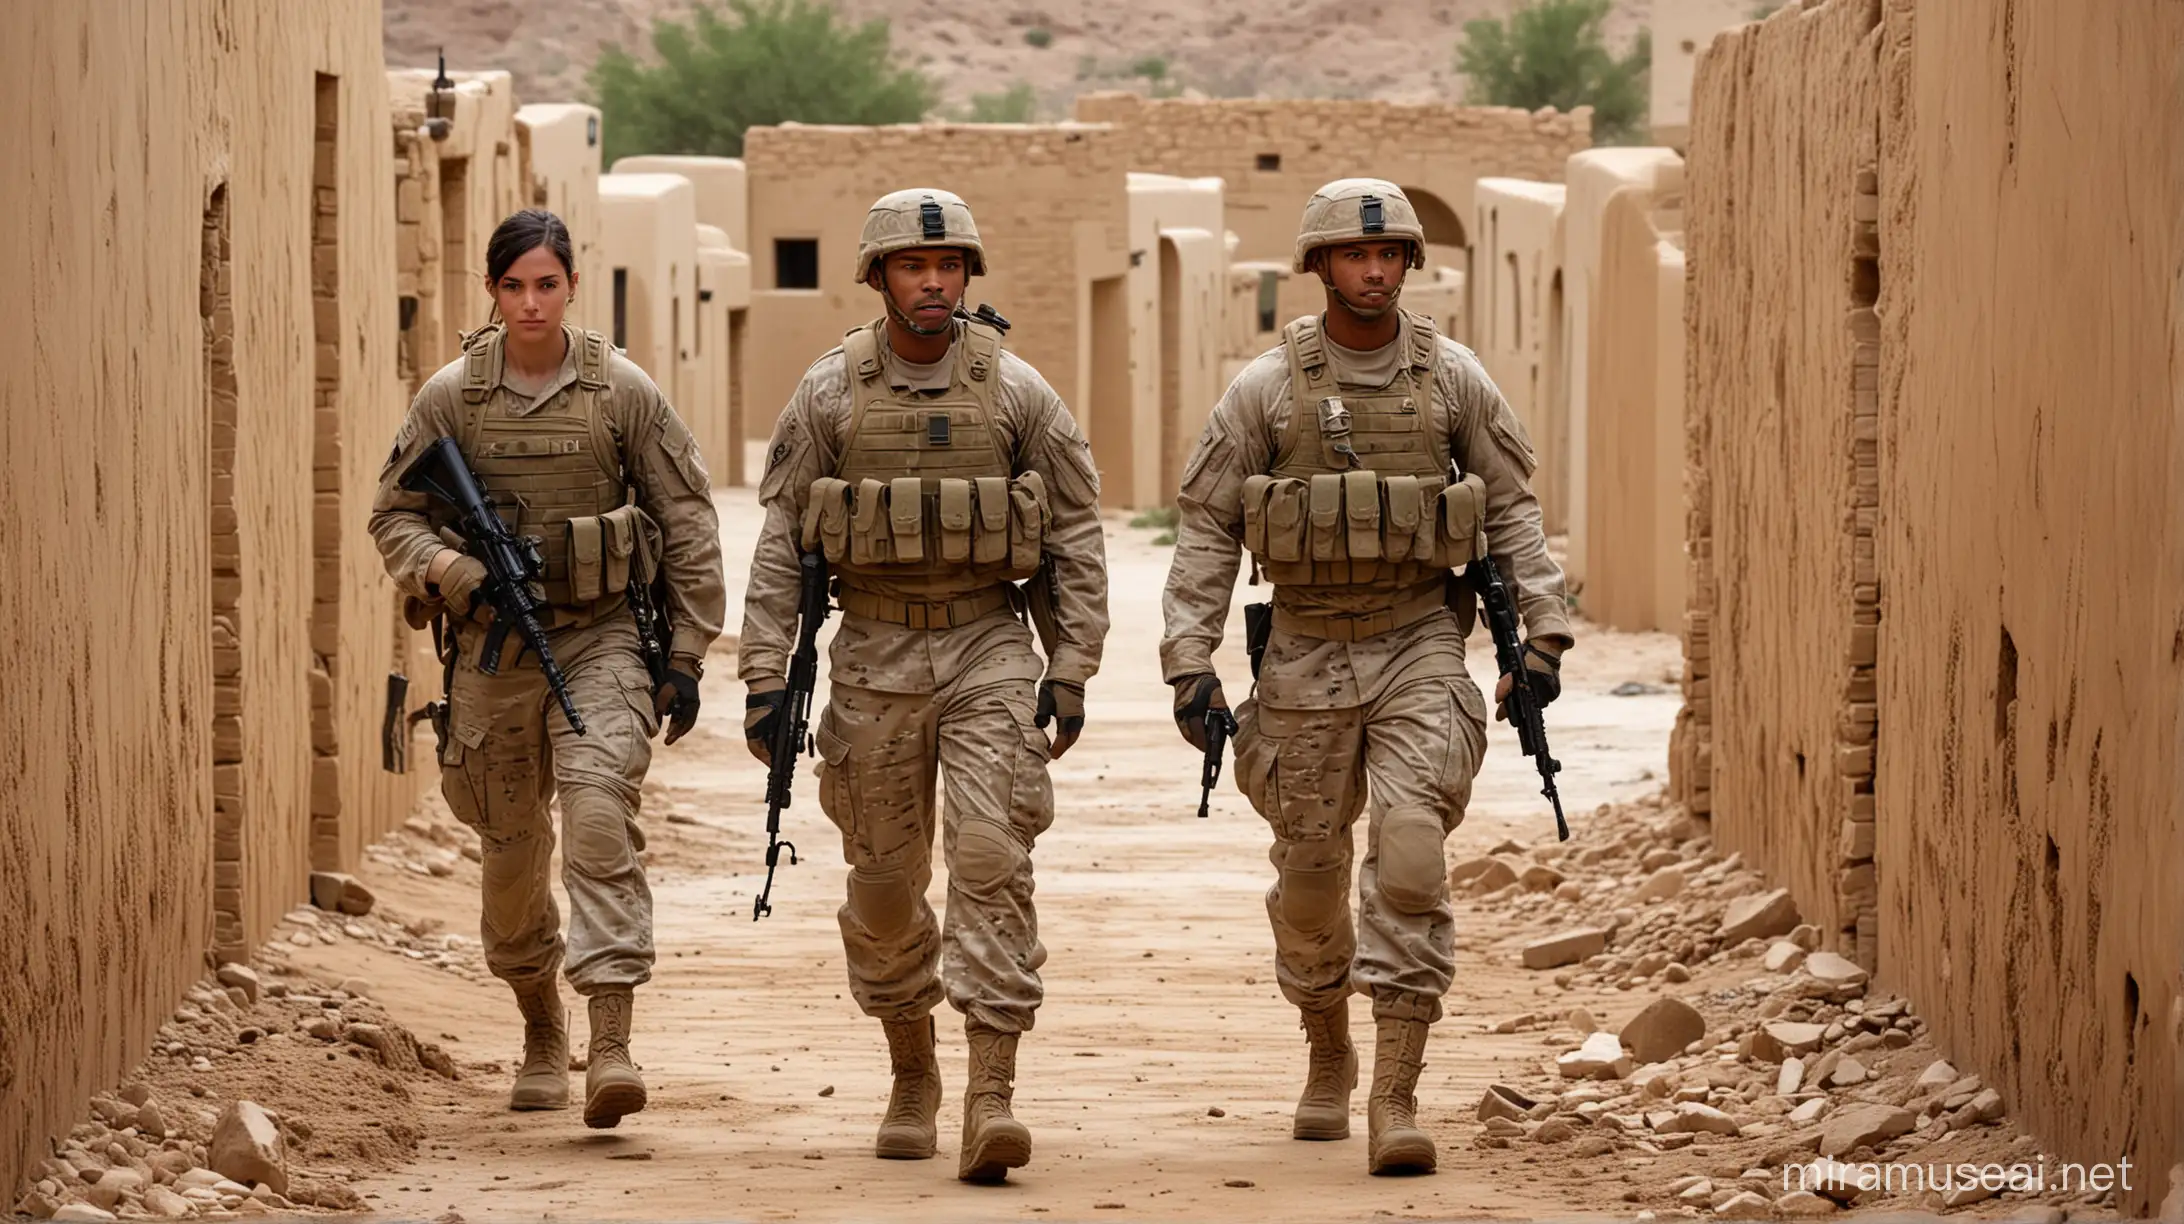 30 year old white American soldier wearing multicam, carrying a carbine, walking ahead of one black soldier, one Hispanic soldier and a white female soldier, surrounded by mud brick walls in the middle east